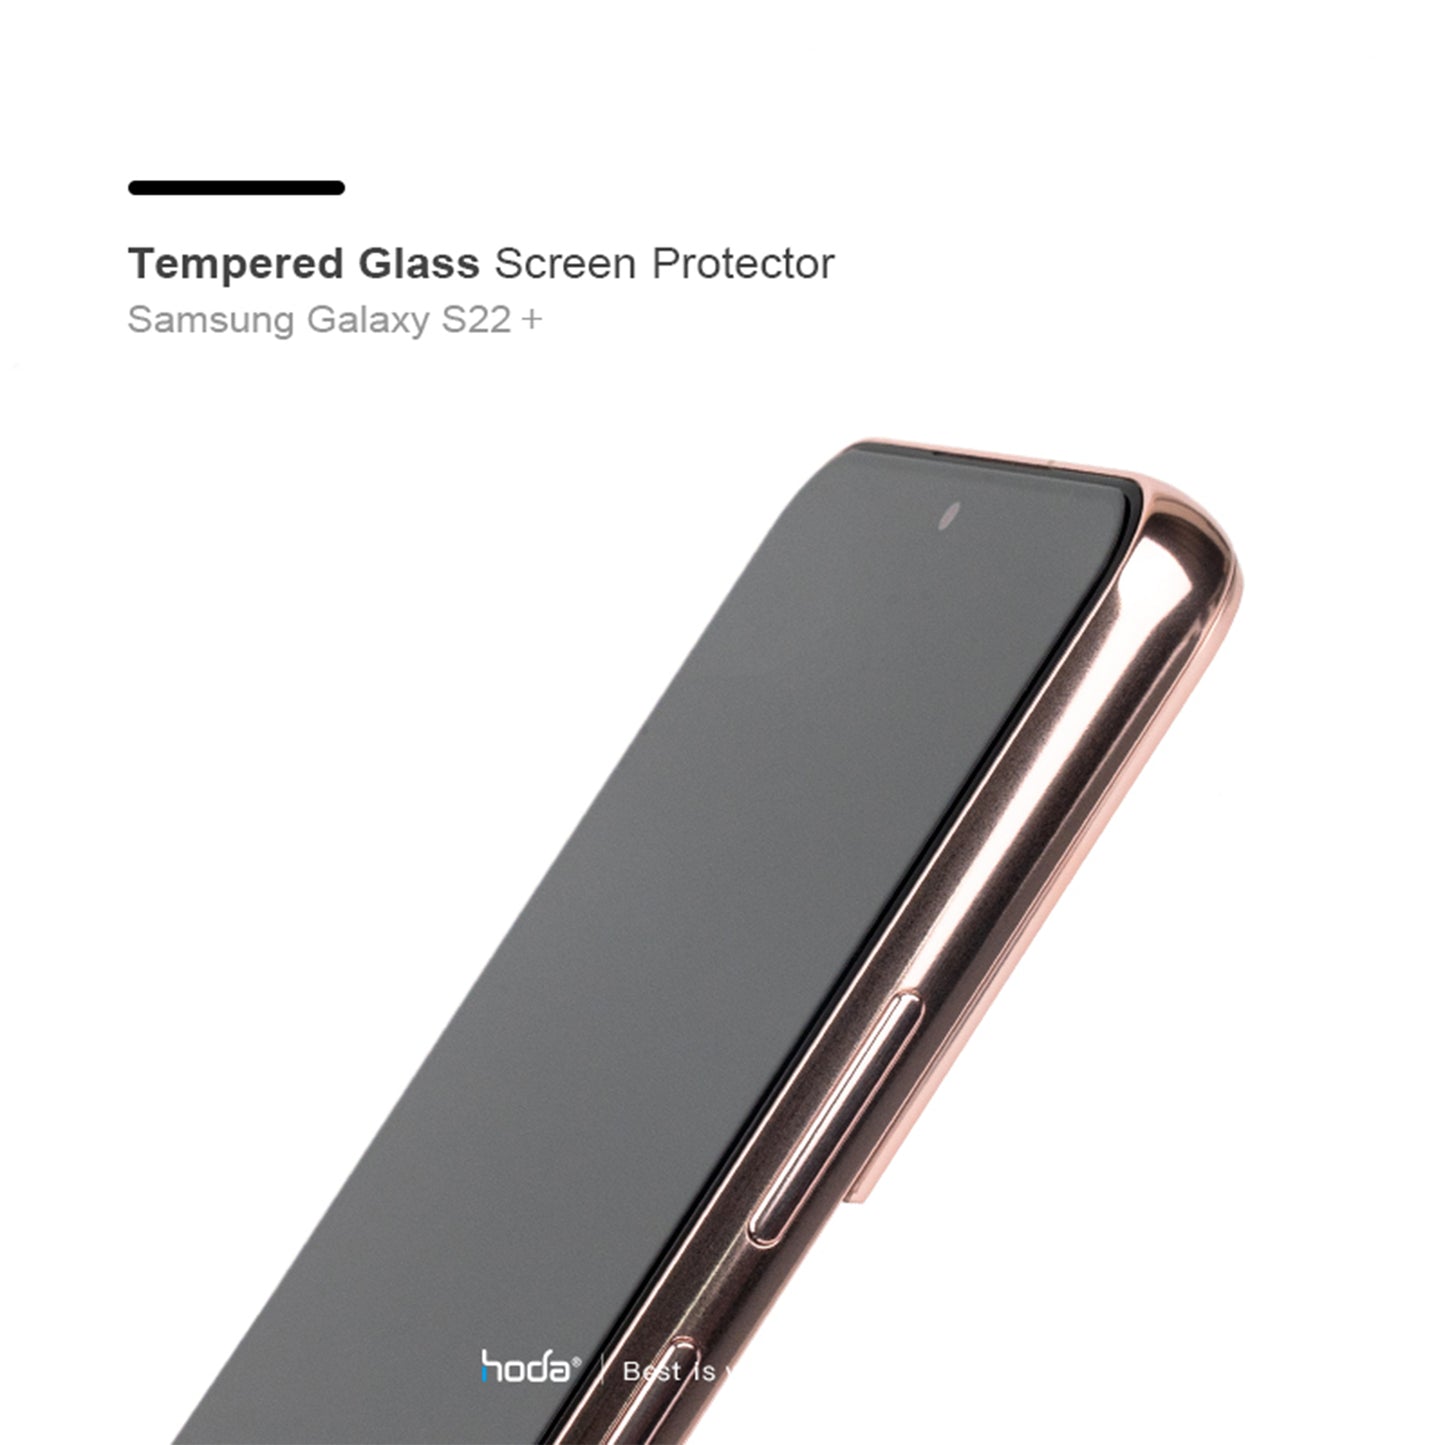 Hoda Tempered Glass for Samsung Galaxy S22 Plus - 0.21mm 2.5D Full Coverage Screen Protector - Clear (Barcode: 4711103544136 )